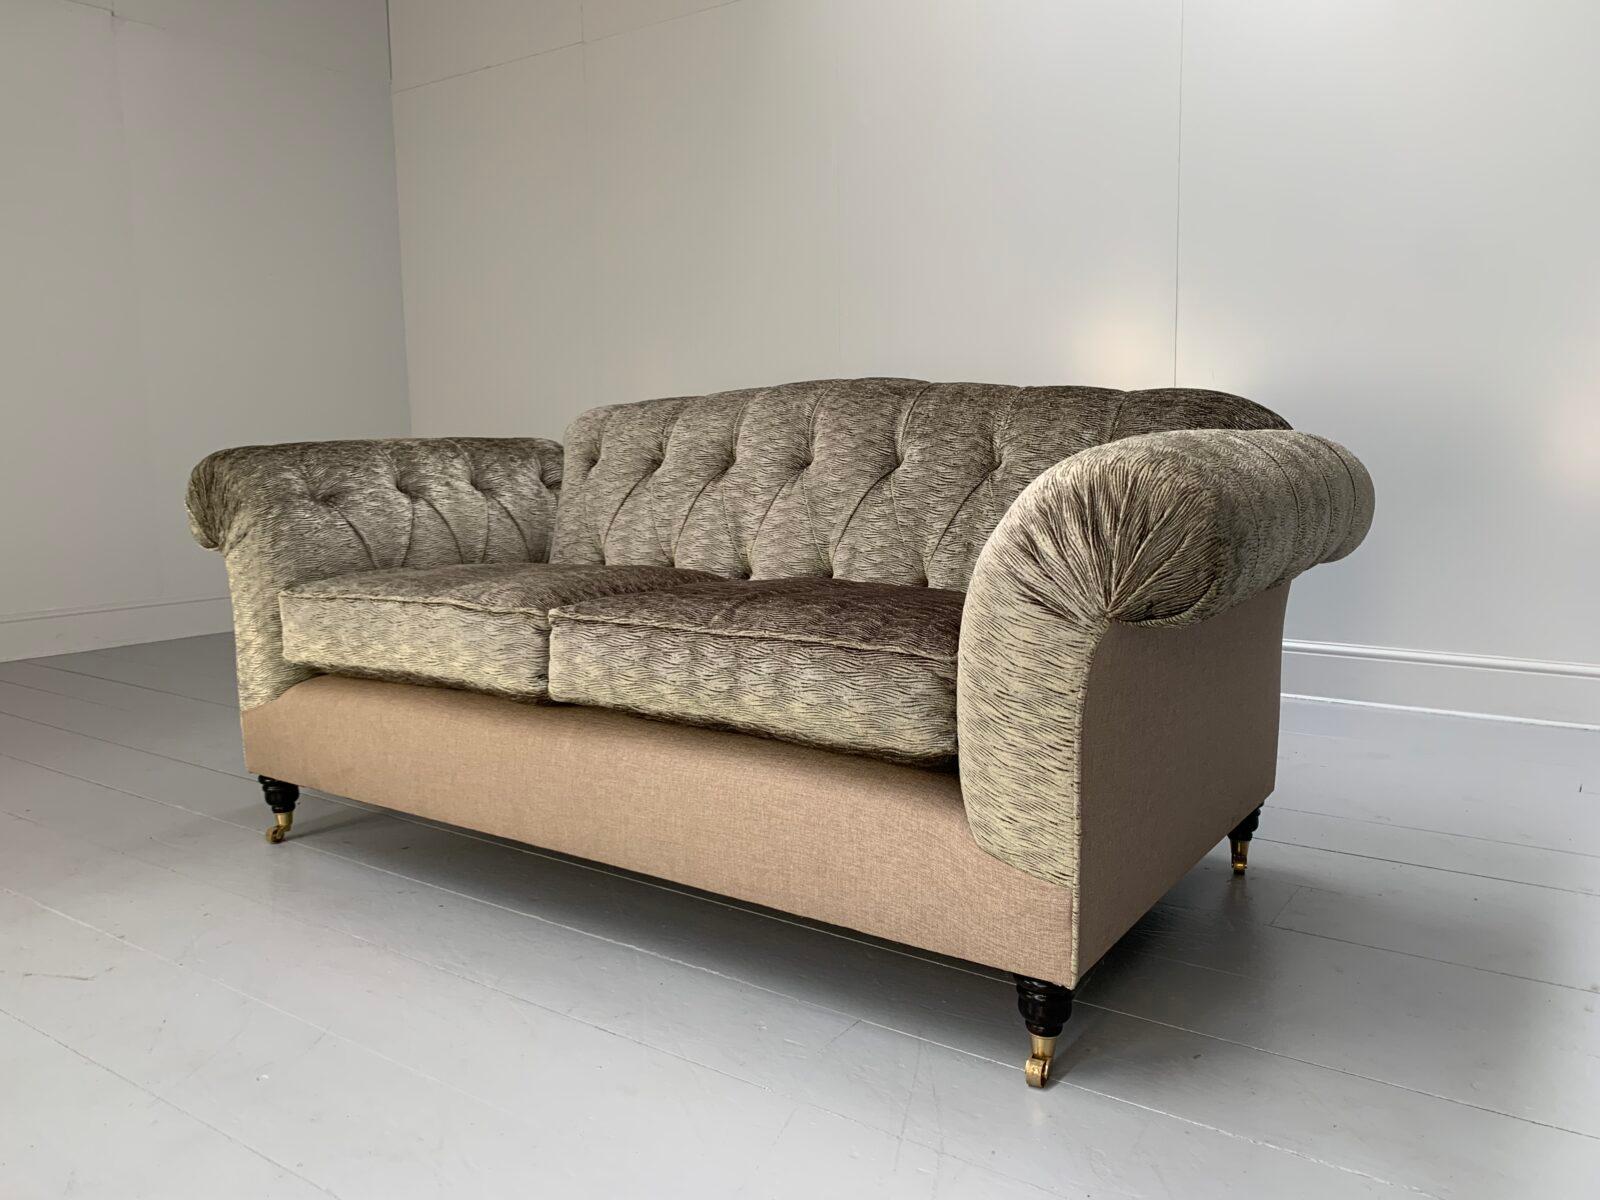 Hello Friends, and welcome to another unmissable offering from Lord Browns Furniture, the UK’s premier resource for fine Sofas and Chairs.
On offer on this occasion is one of the most stunning, eye-catching pieces of furniture you could hope to